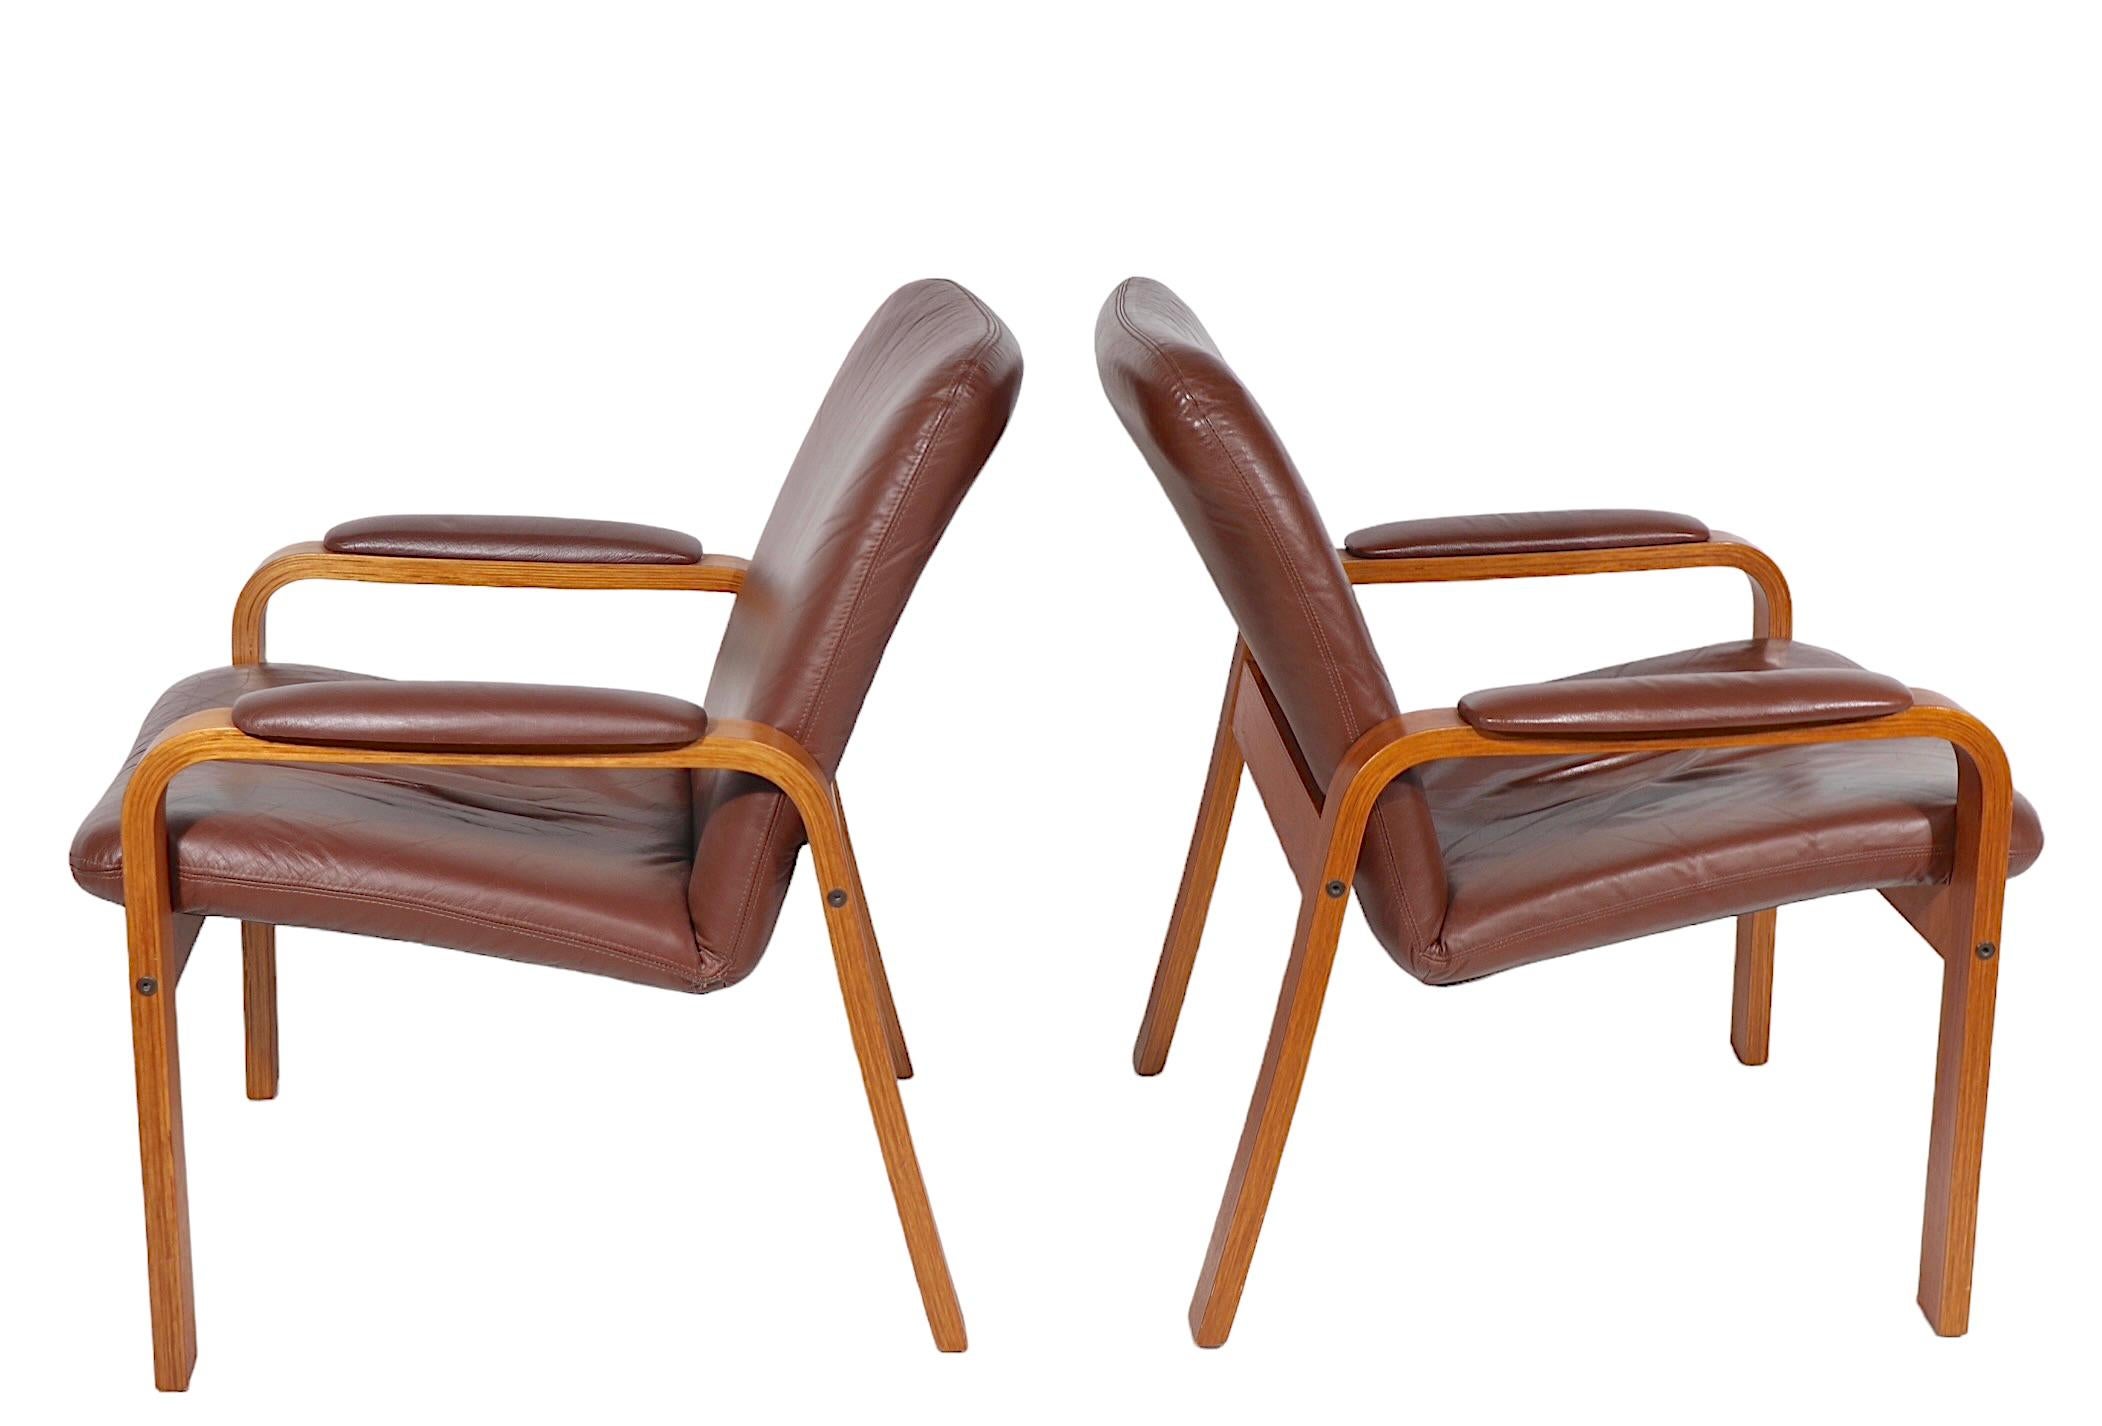 Leather Pr. Scandinavian Mid Century Modern Lounge Arm Chairs Made in Norway by Ekorness For Sale